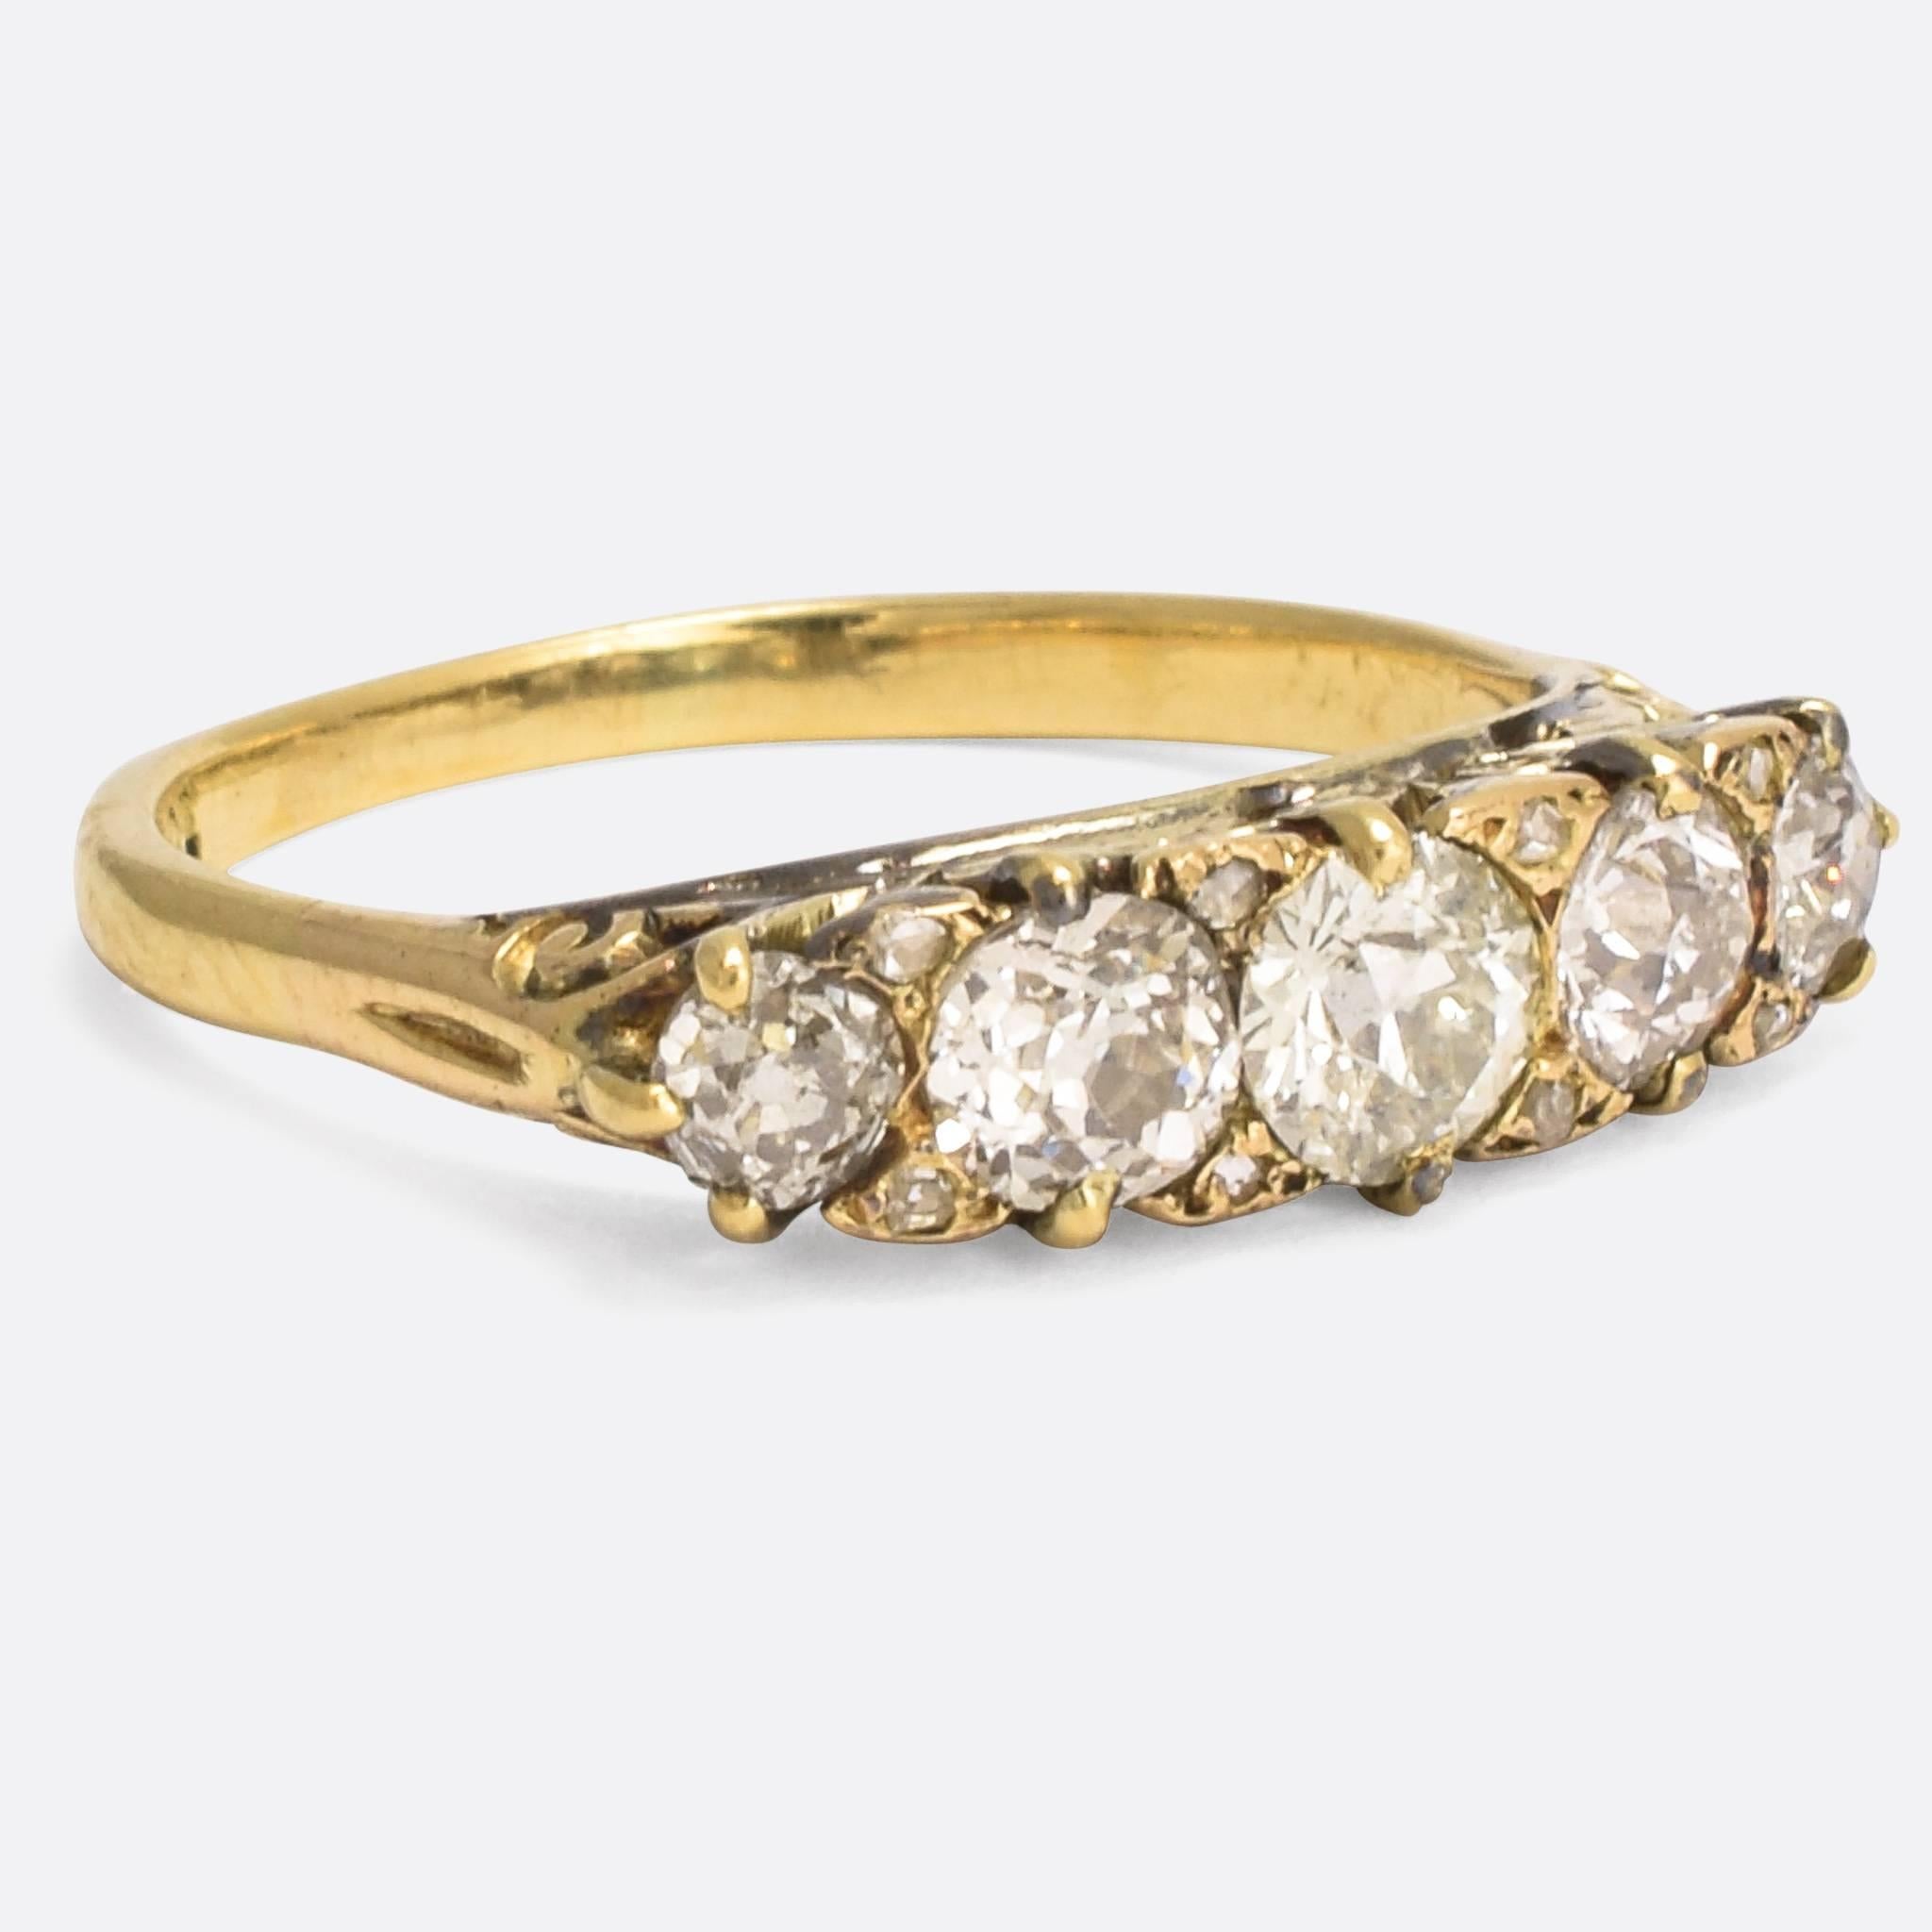 An especially nice quality mid-Victorian diamond 5-stone ring, with beautiful scrolled detailing to the sides and tiny rose cut diamond points in between the principal stones. The ring is set with a total of 1.75 carats of old European cut diamonds,